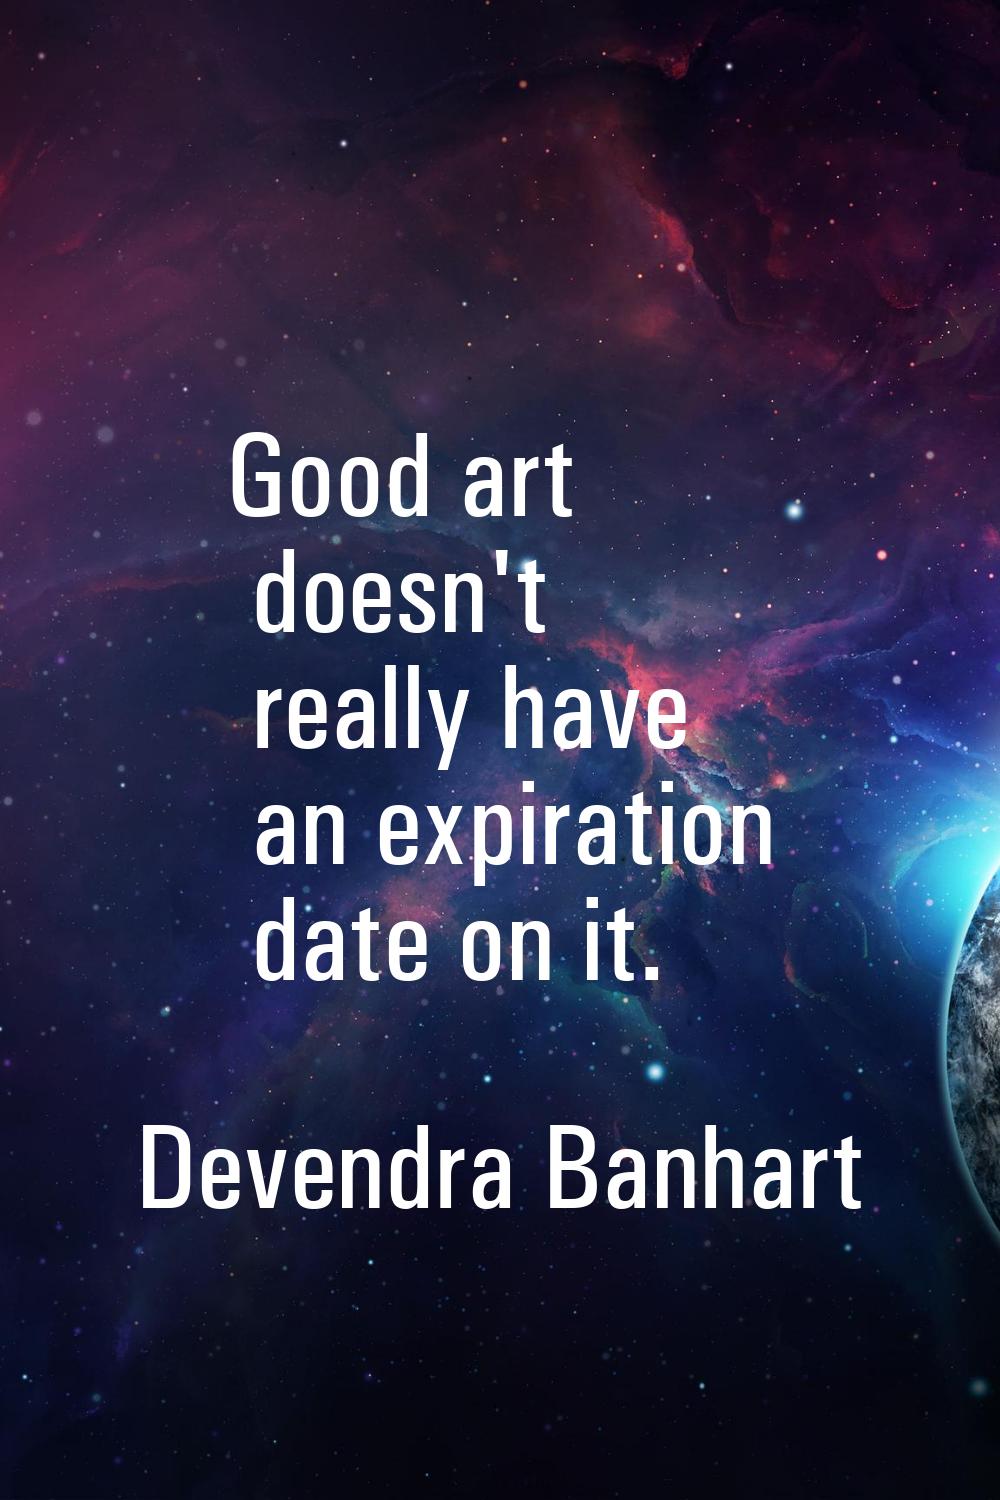 Good art doesn't really have an expiration date on it.